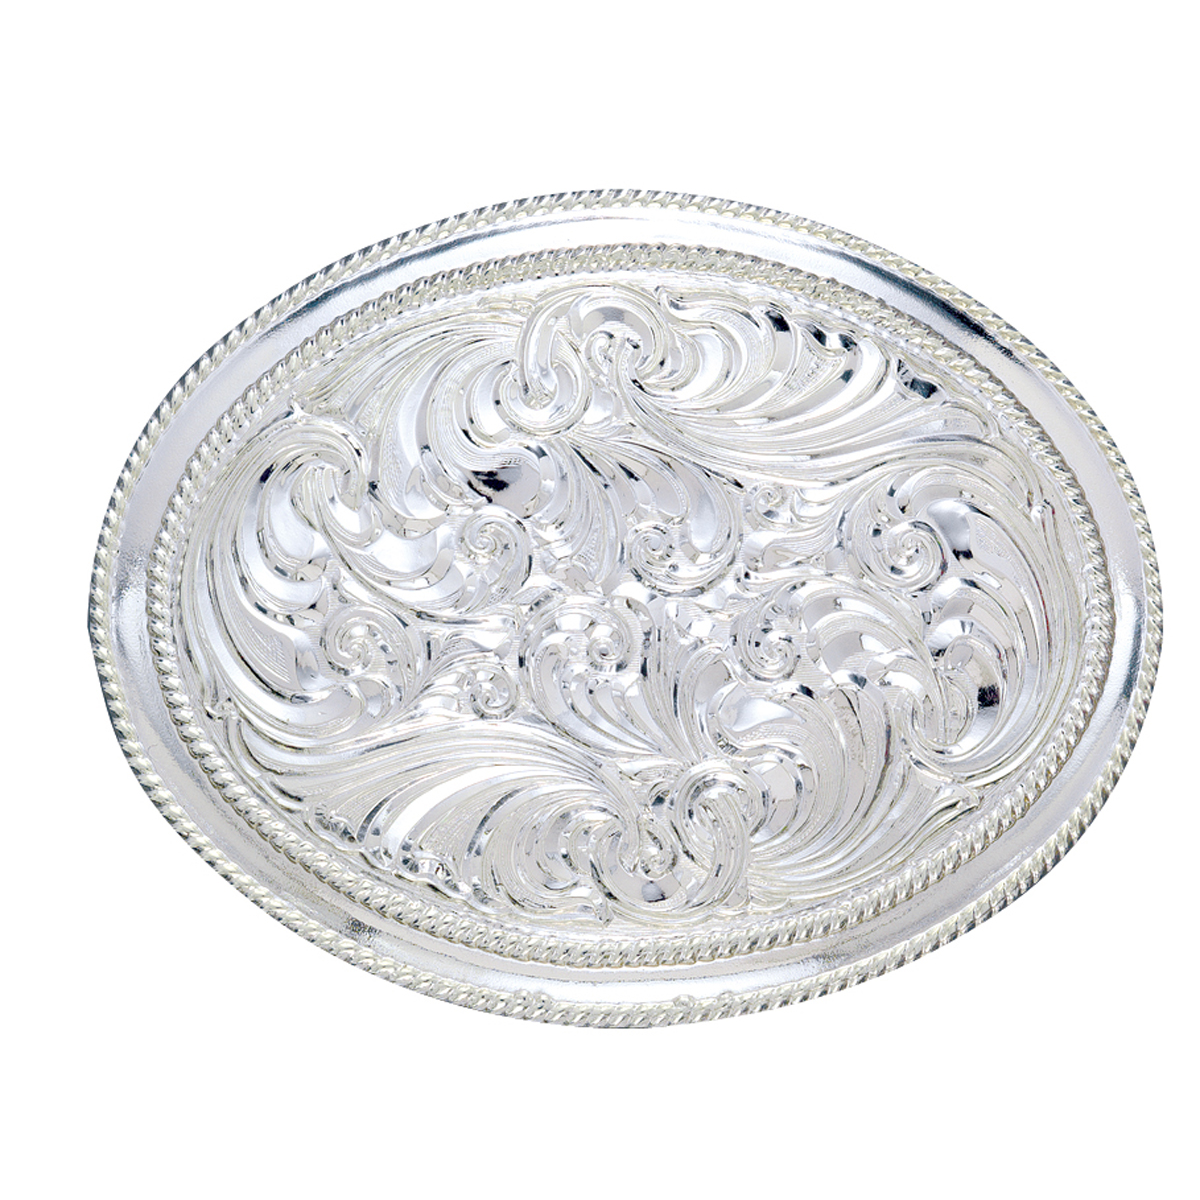 Crumrine Floral Scroll Design Oval Buckle - Shiny Silver